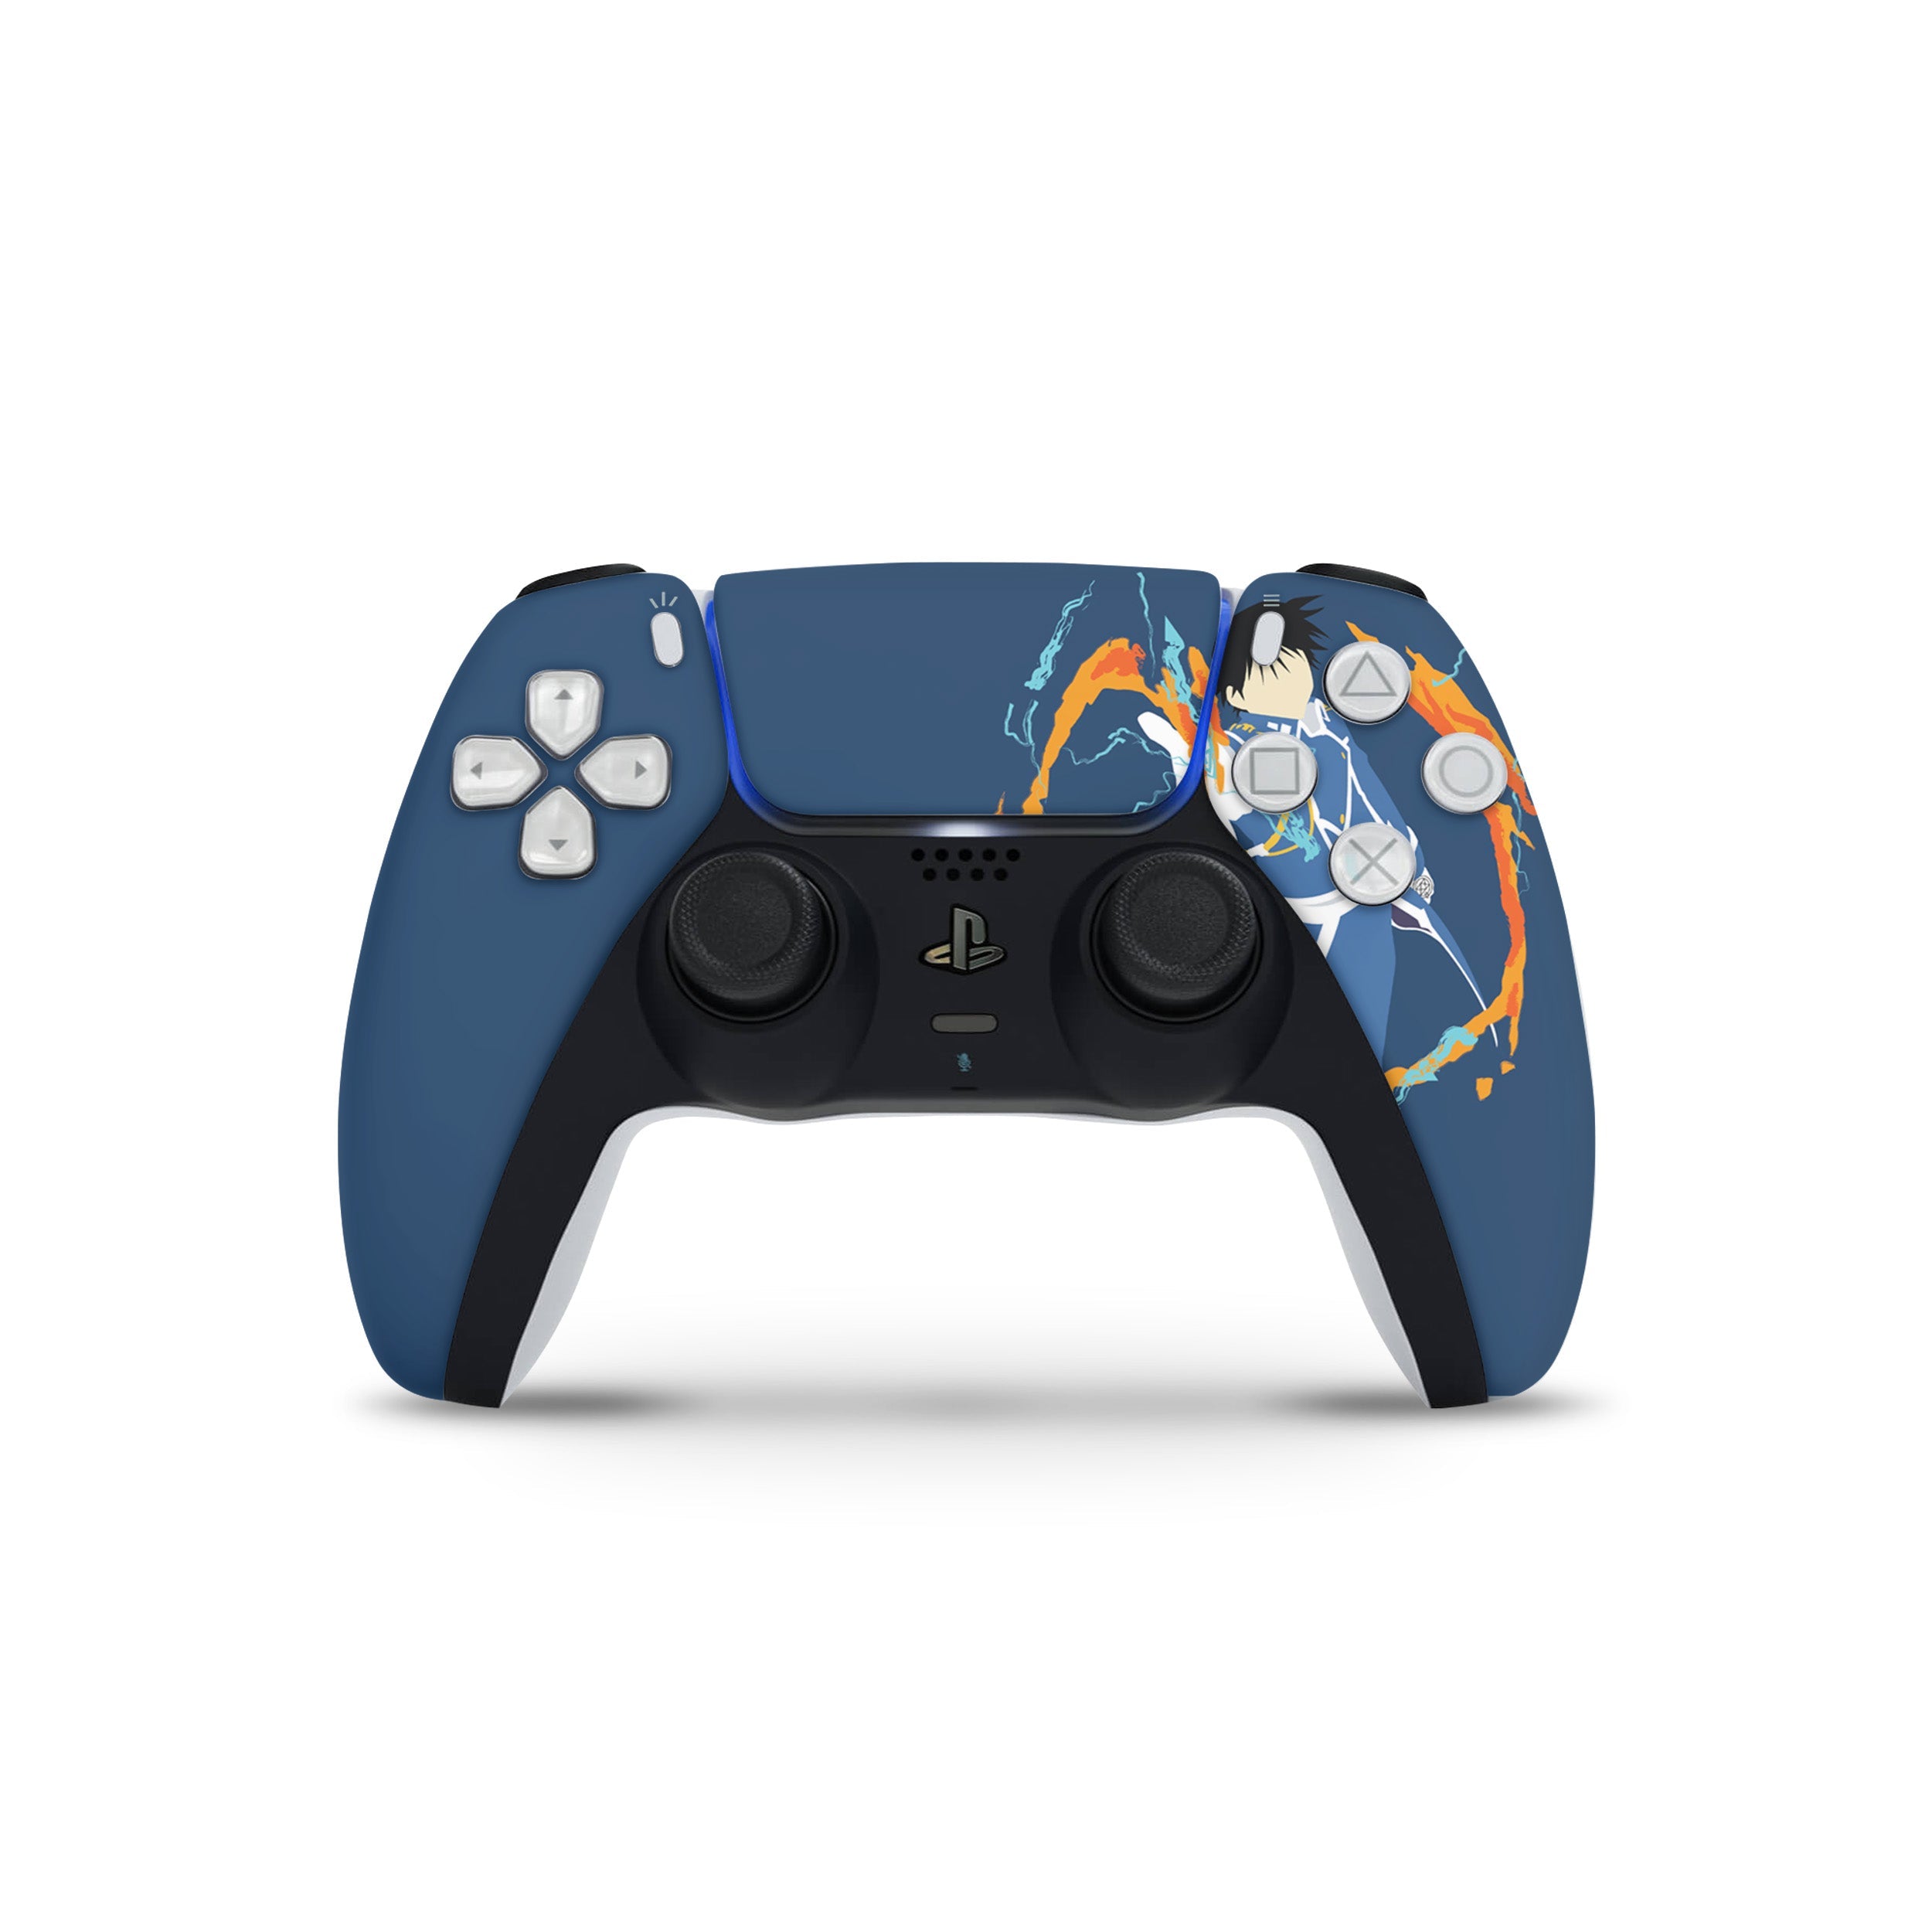 A video game skin featuring a Fullmetal Alchemist Roy Mustang design for the PS5 DualSense Controller.